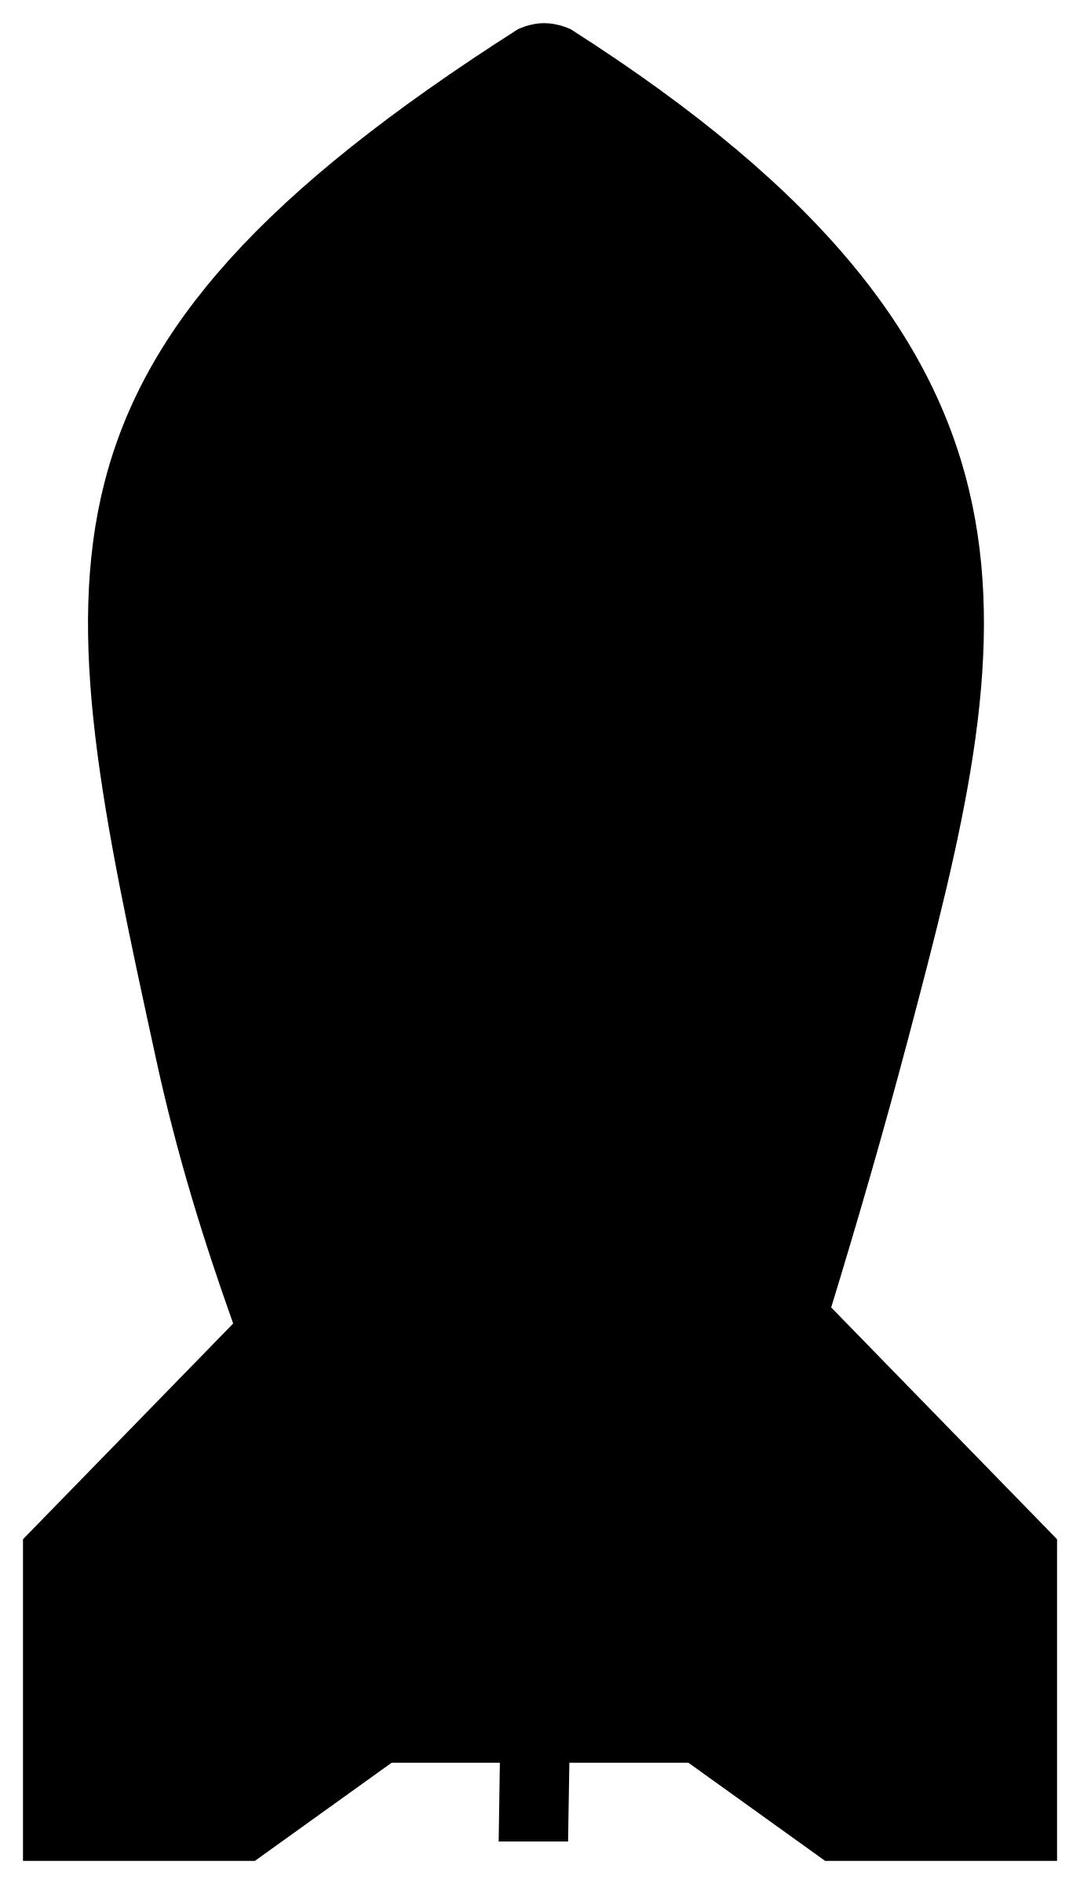 Bomb silhouette png transparent